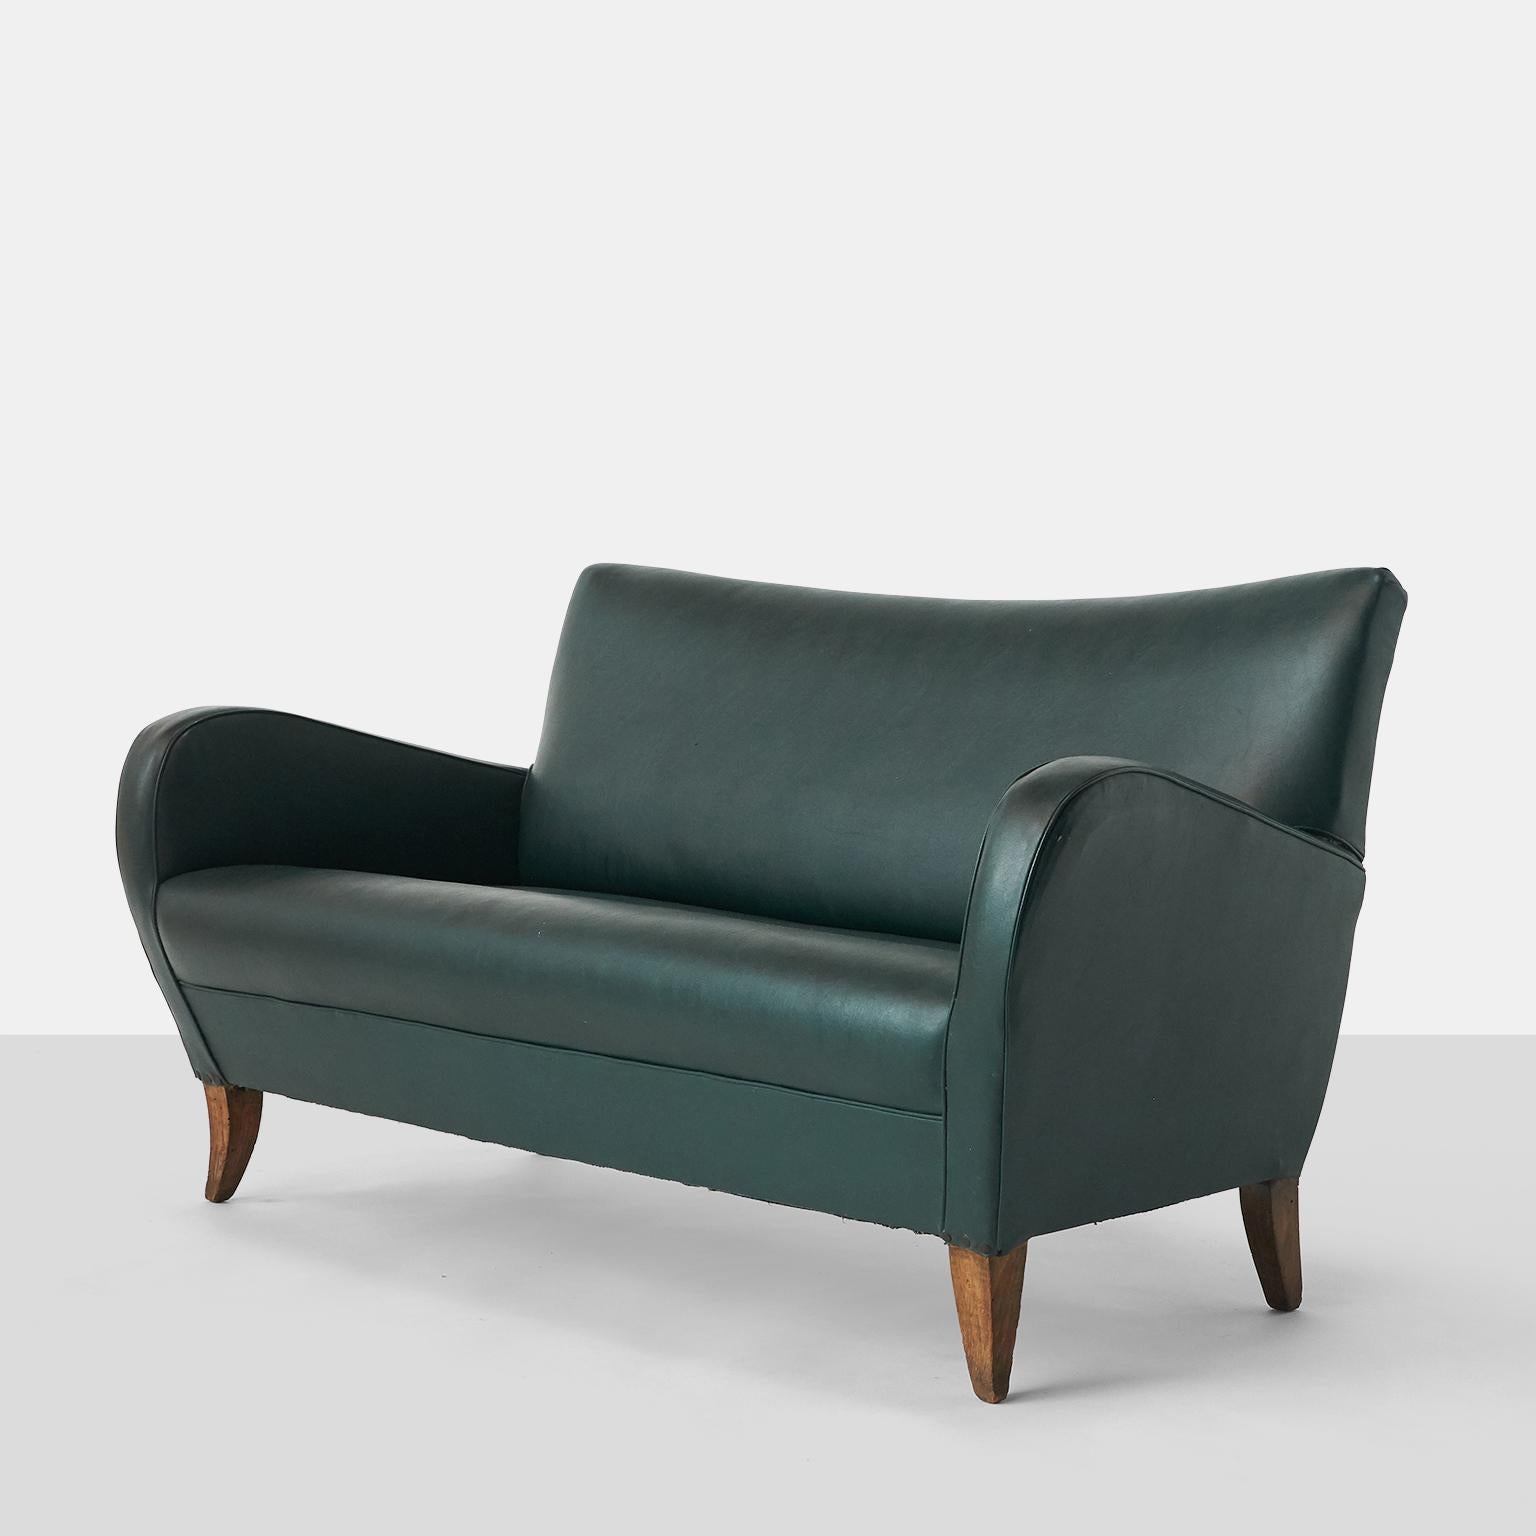 A small settee produced by Malatesta and Masson in Rome in the early 1950s. Sweeping arms make this a very comfortable sit.

